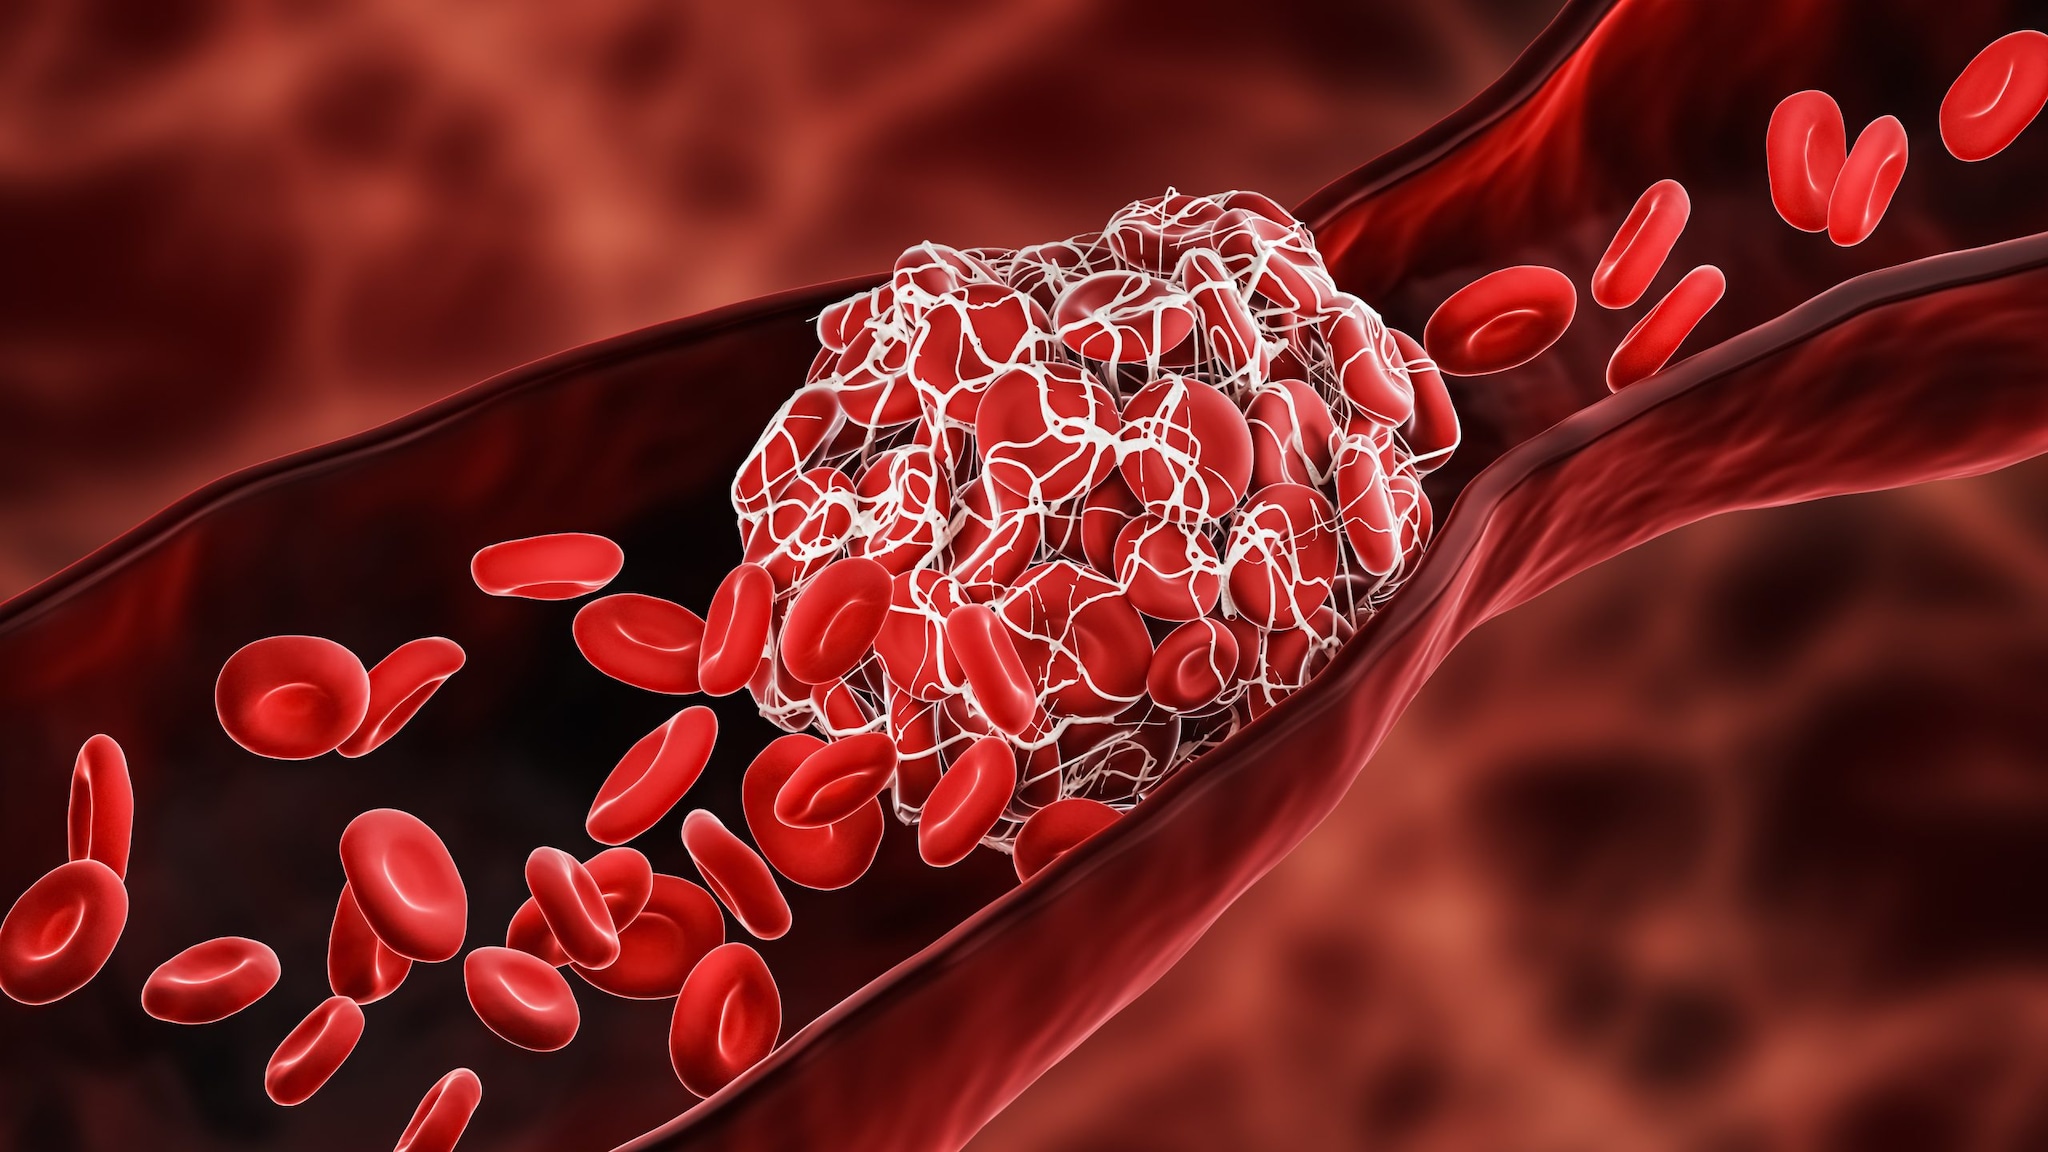 Image of a blood clot (cluster of red blood cells clumped together) blocking a blood vessel